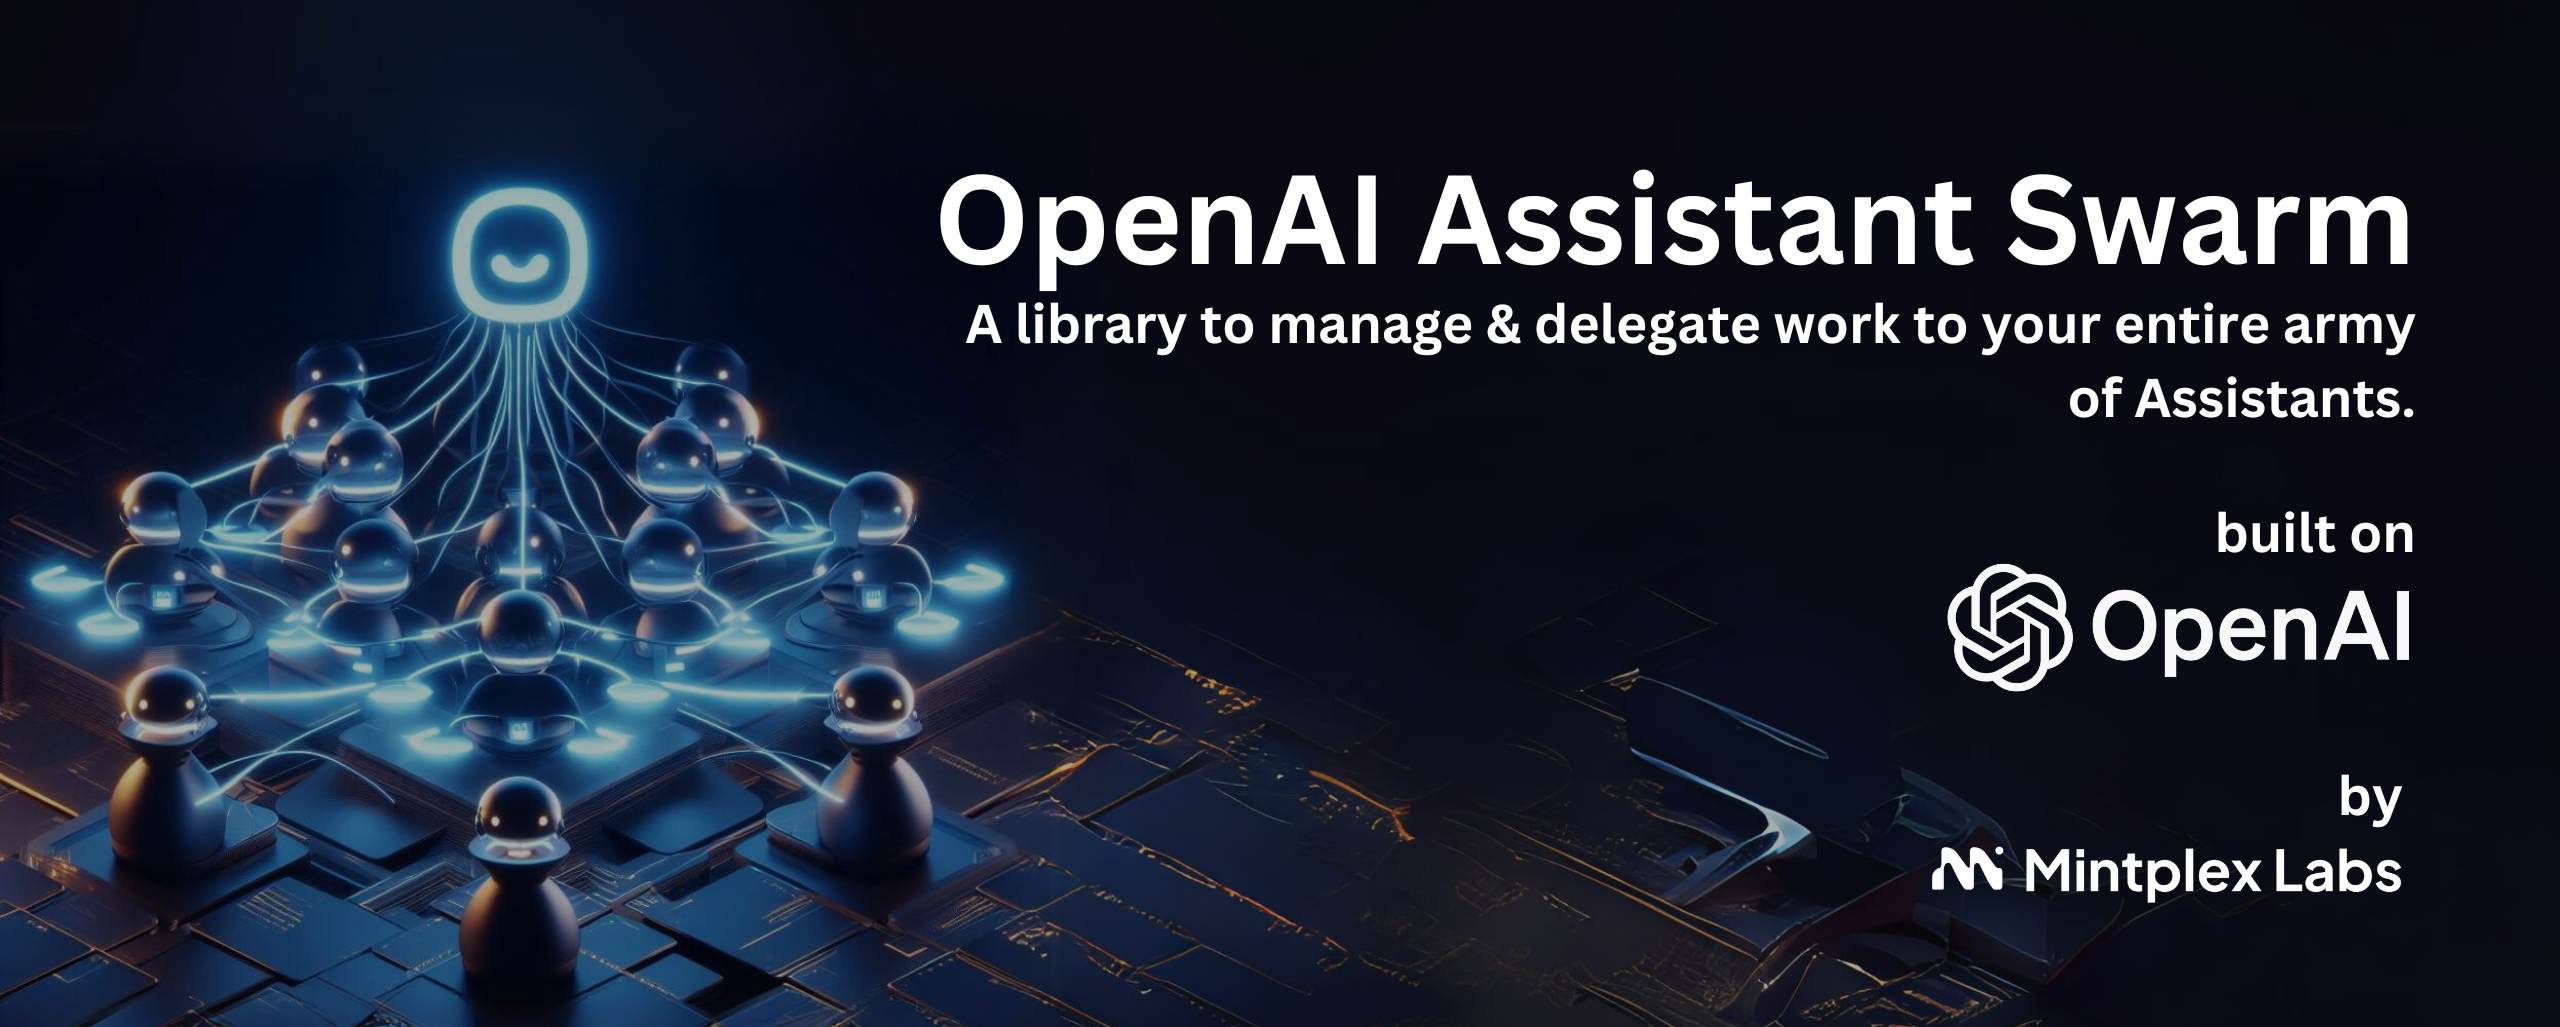 OpenAI Assistant Swarm Manager banner